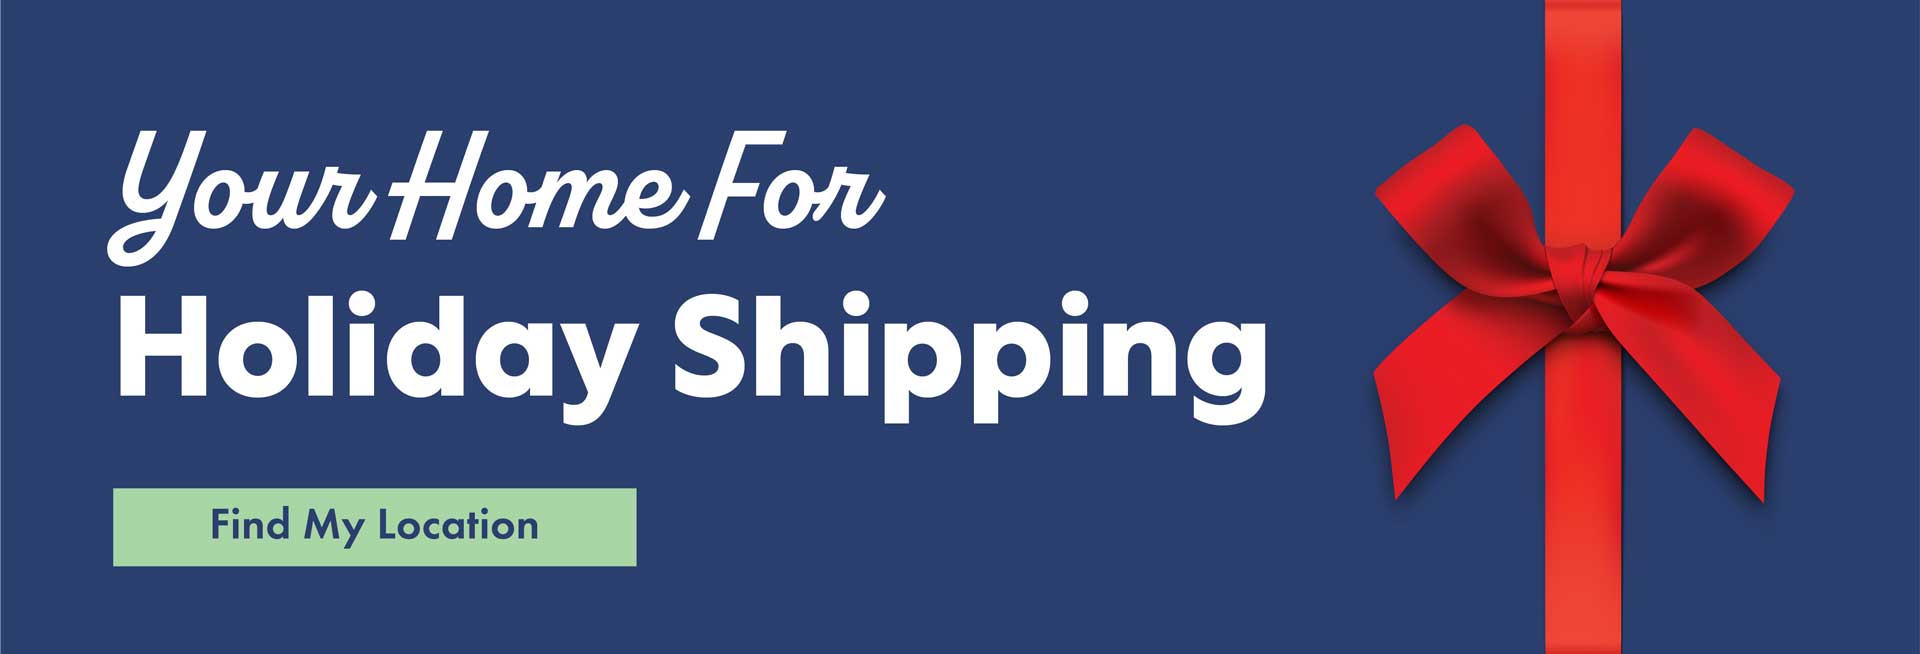 Your Home For Holiday Shipping. - Find My Location